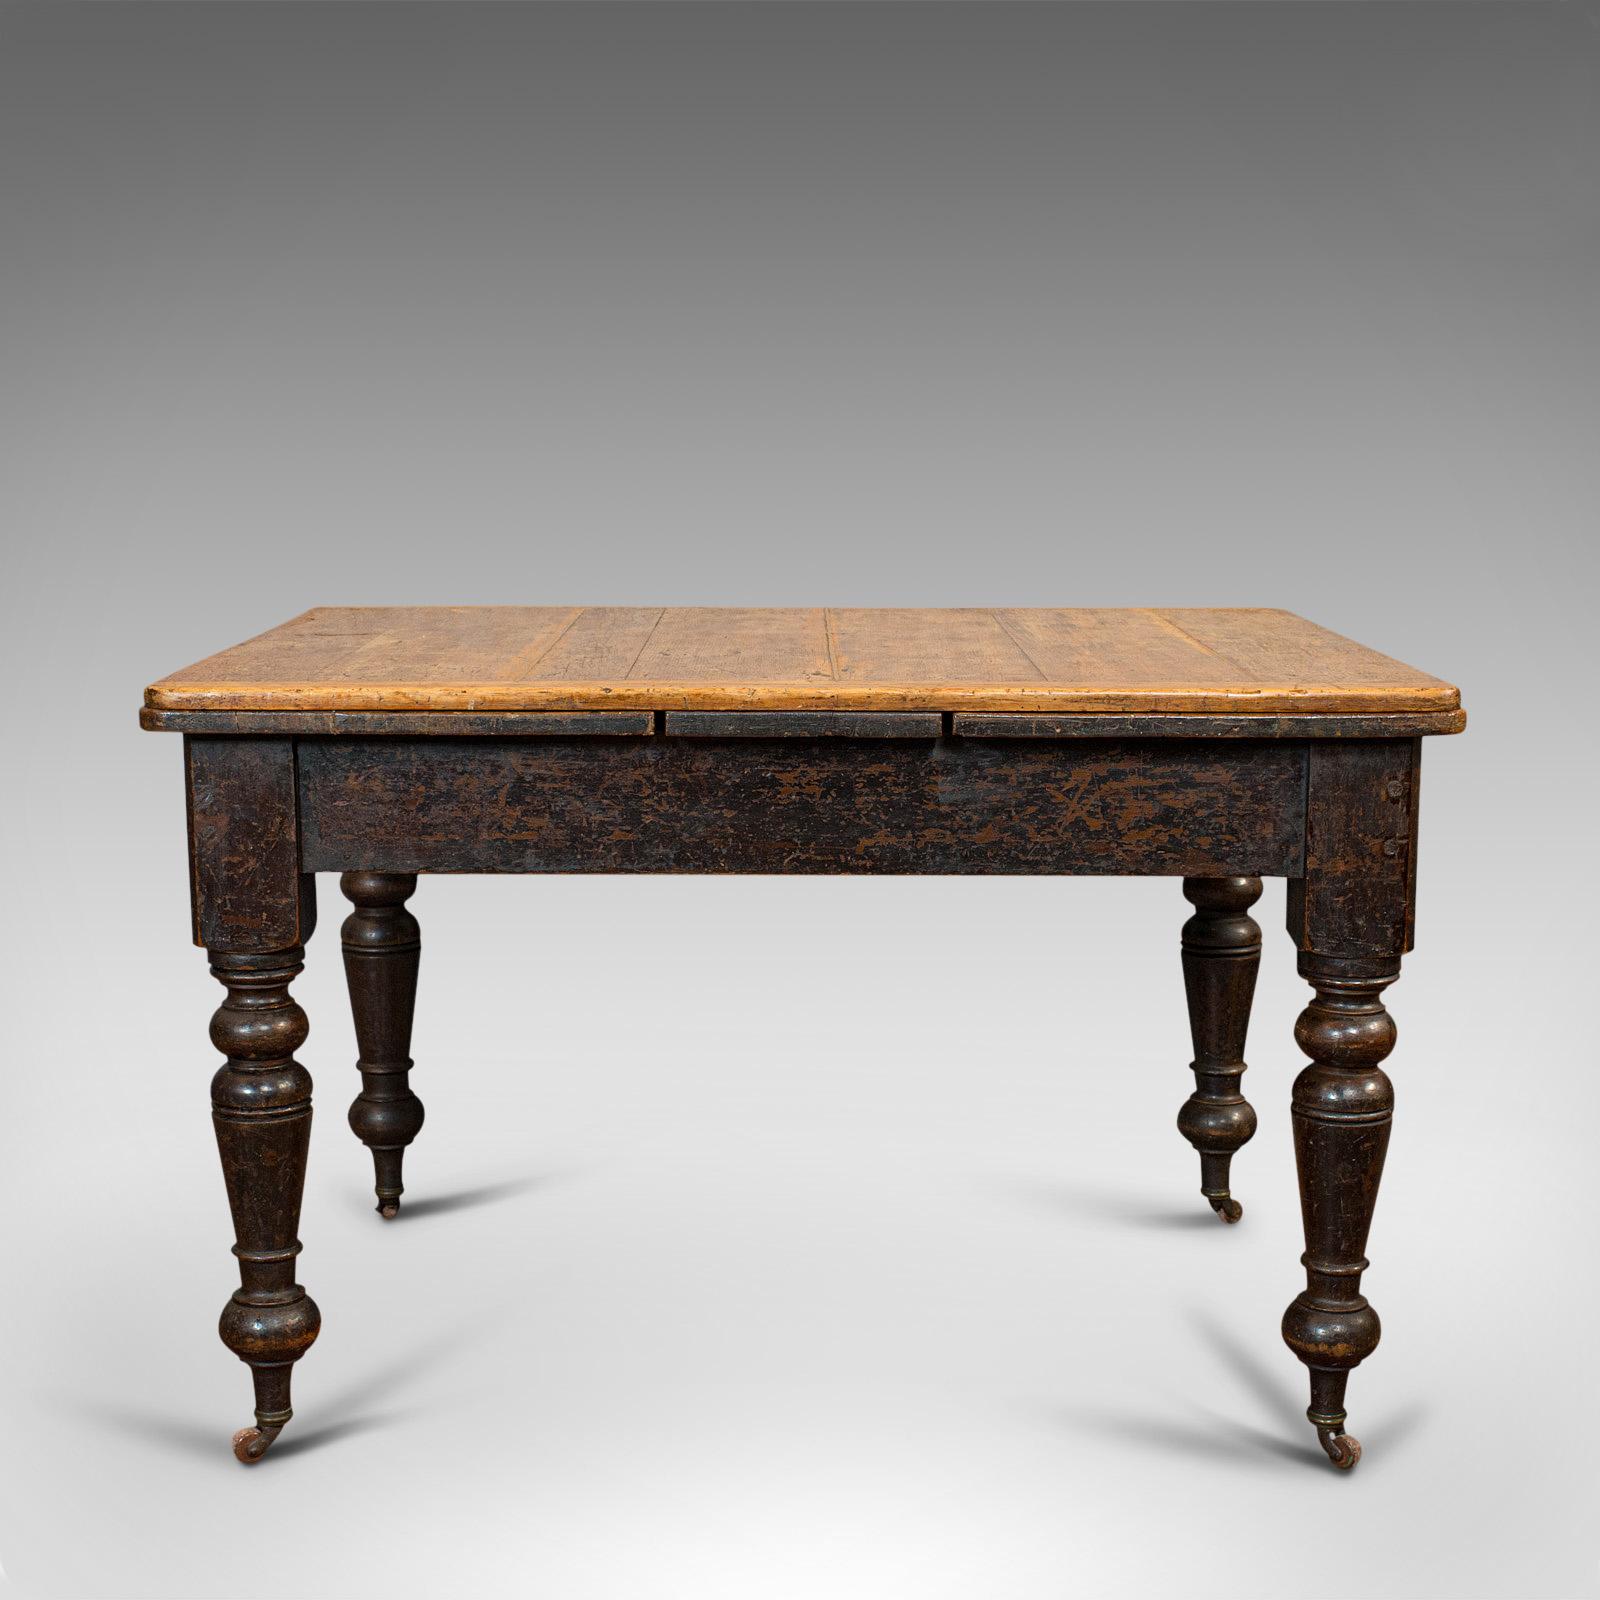 This is an antique kitchen table. An English, extending scrub top dining table, dating to the Victorian period, circa 1870.

Charming, with country house appeal
Displaying a desirable aged patina
Original dark stained pine shows appealing